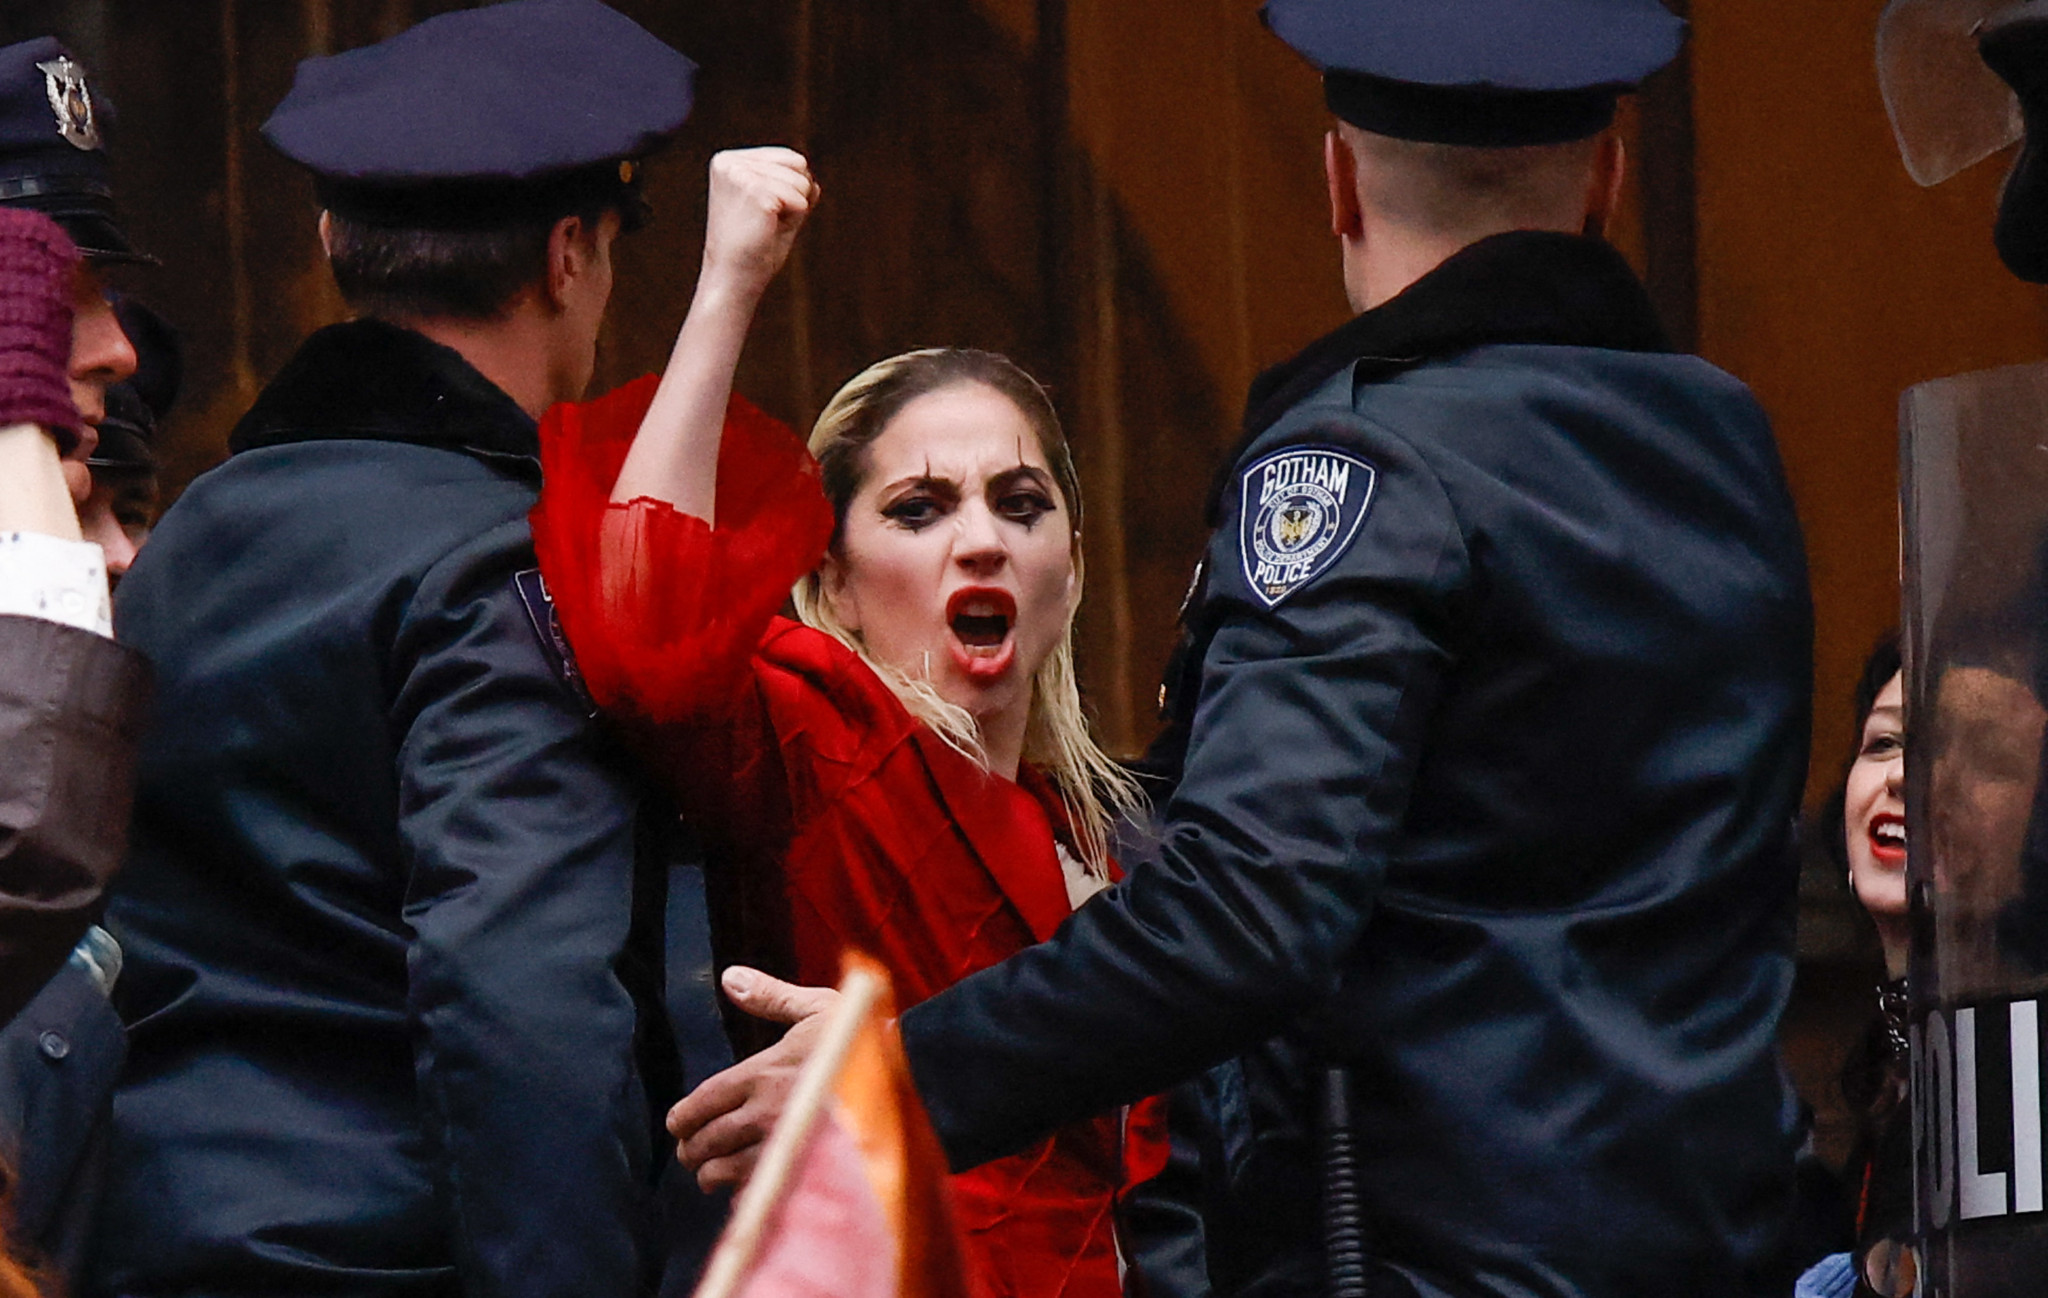 Lady Gaga performs during the filming of the movie "Joker: Folie à Deux" in New York on March 25, 2023. The ‘Joker' sequel starring Lady Gaga and Joaquin Phoenix filmed outside the courthouse where the grand jury investigating former US President Donald Trump meets. (Photo by KENA BETANCUR / AFP)